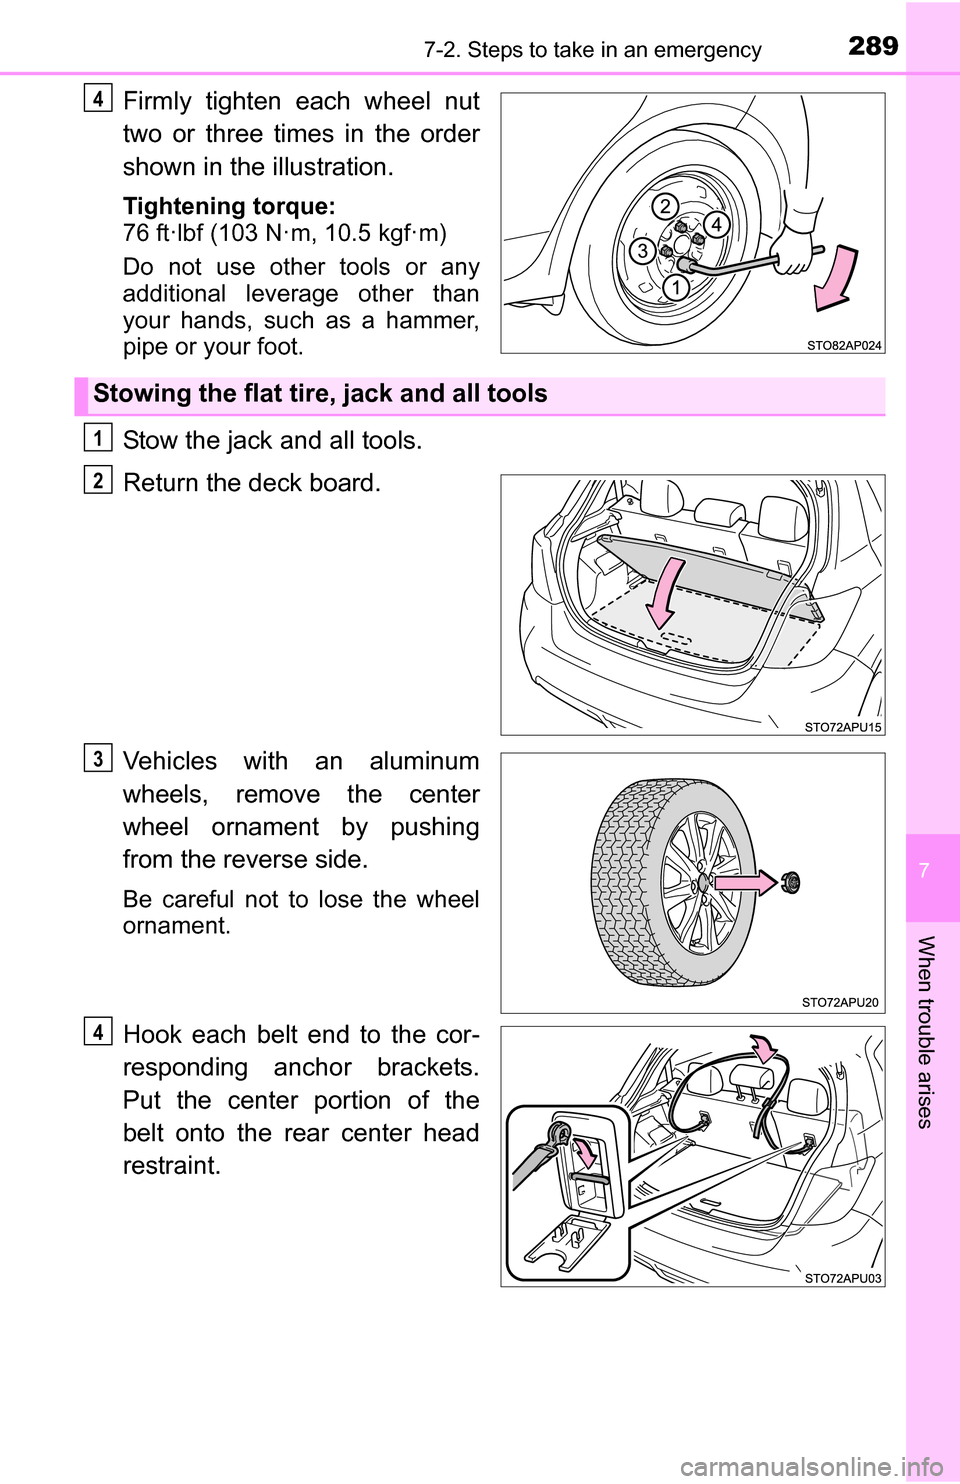 TOYOTA YARIS 2016 3.G Owners Guide 2897-2. Steps to take in an emergency
7
When trouble arises
Firmly tighten each wheel nut
two or three times in the order
shown in the illustration.
Tightening torque:
76 ft·lbf (103 N·m, 10.5 kgf·